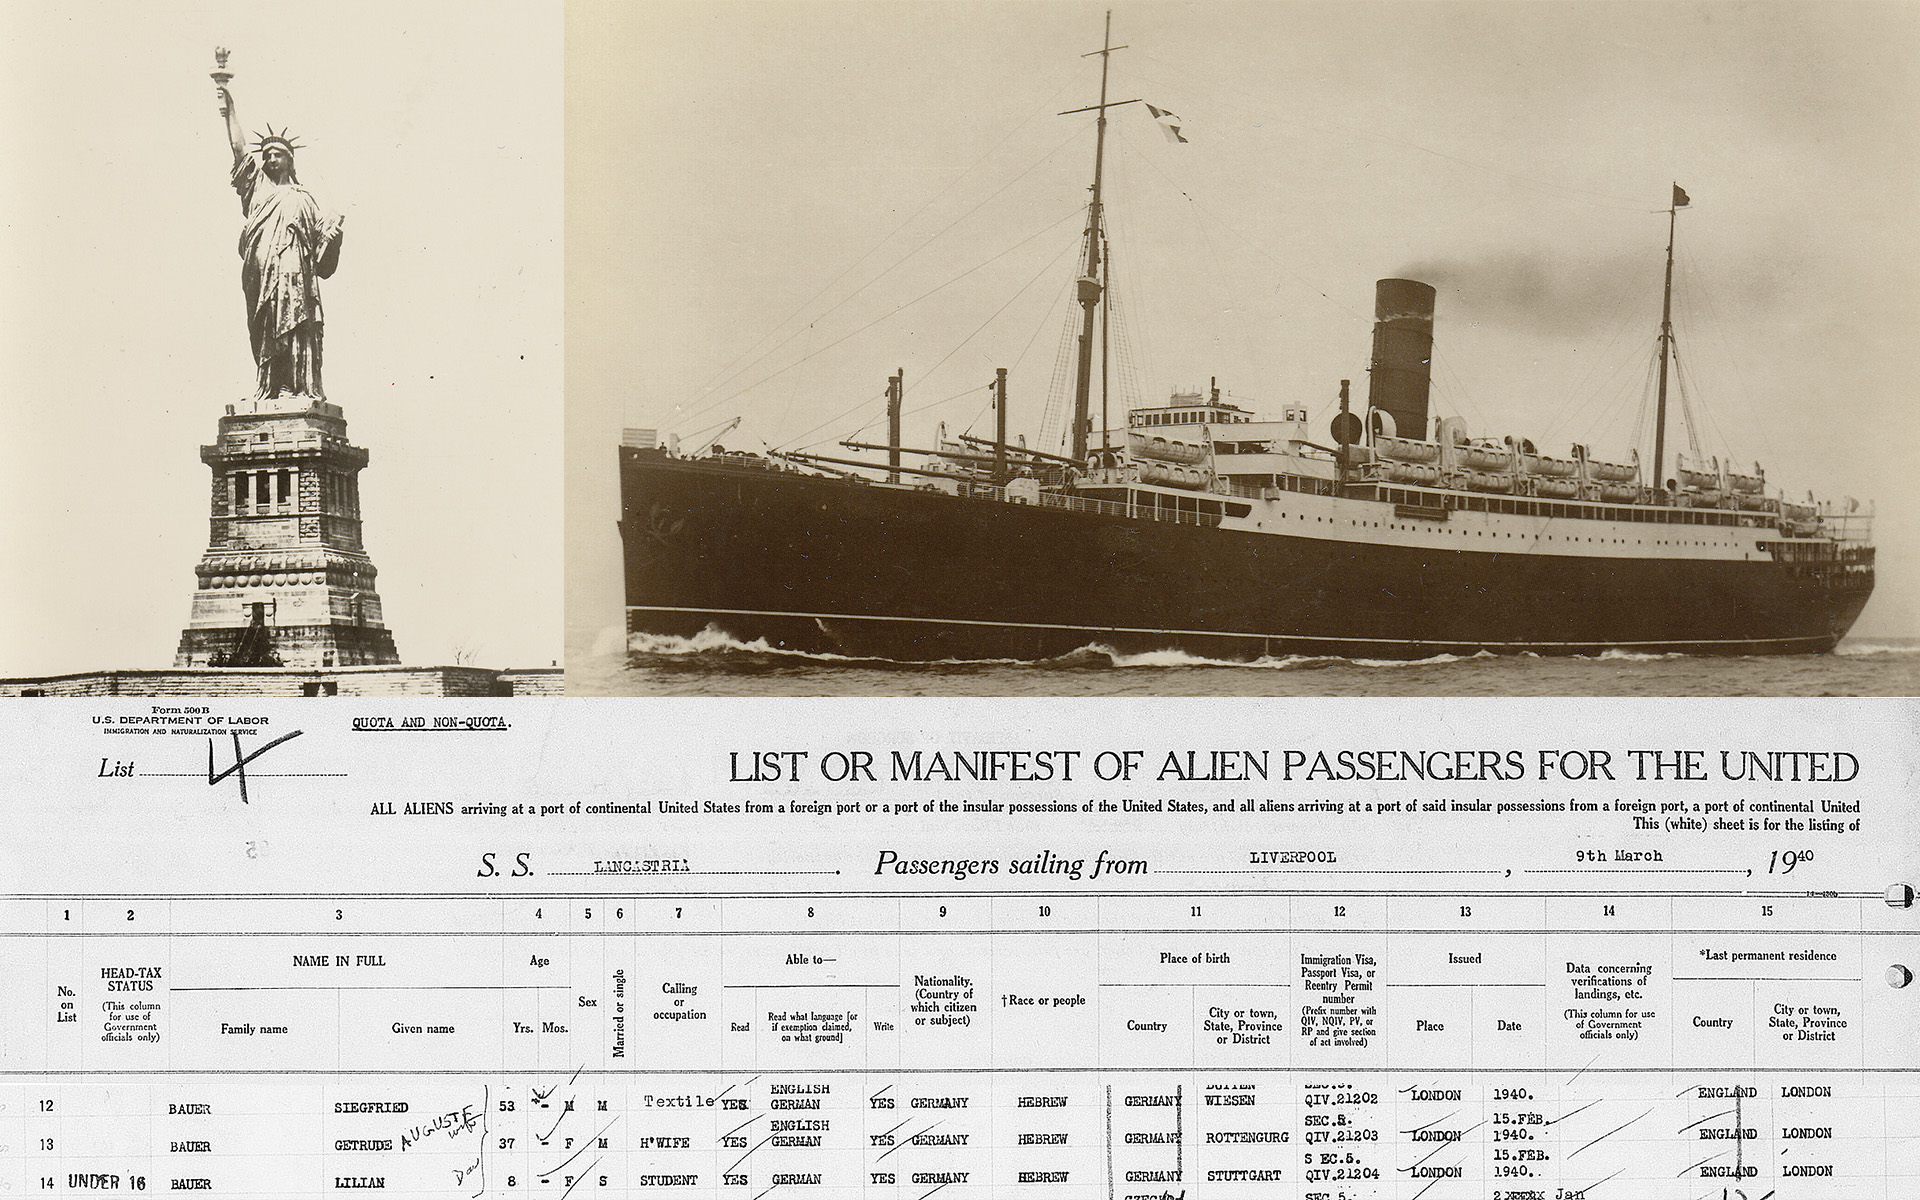 Clockwise: Statue of Liberty, the Lancastria, passenger list with the names of the Bauers.